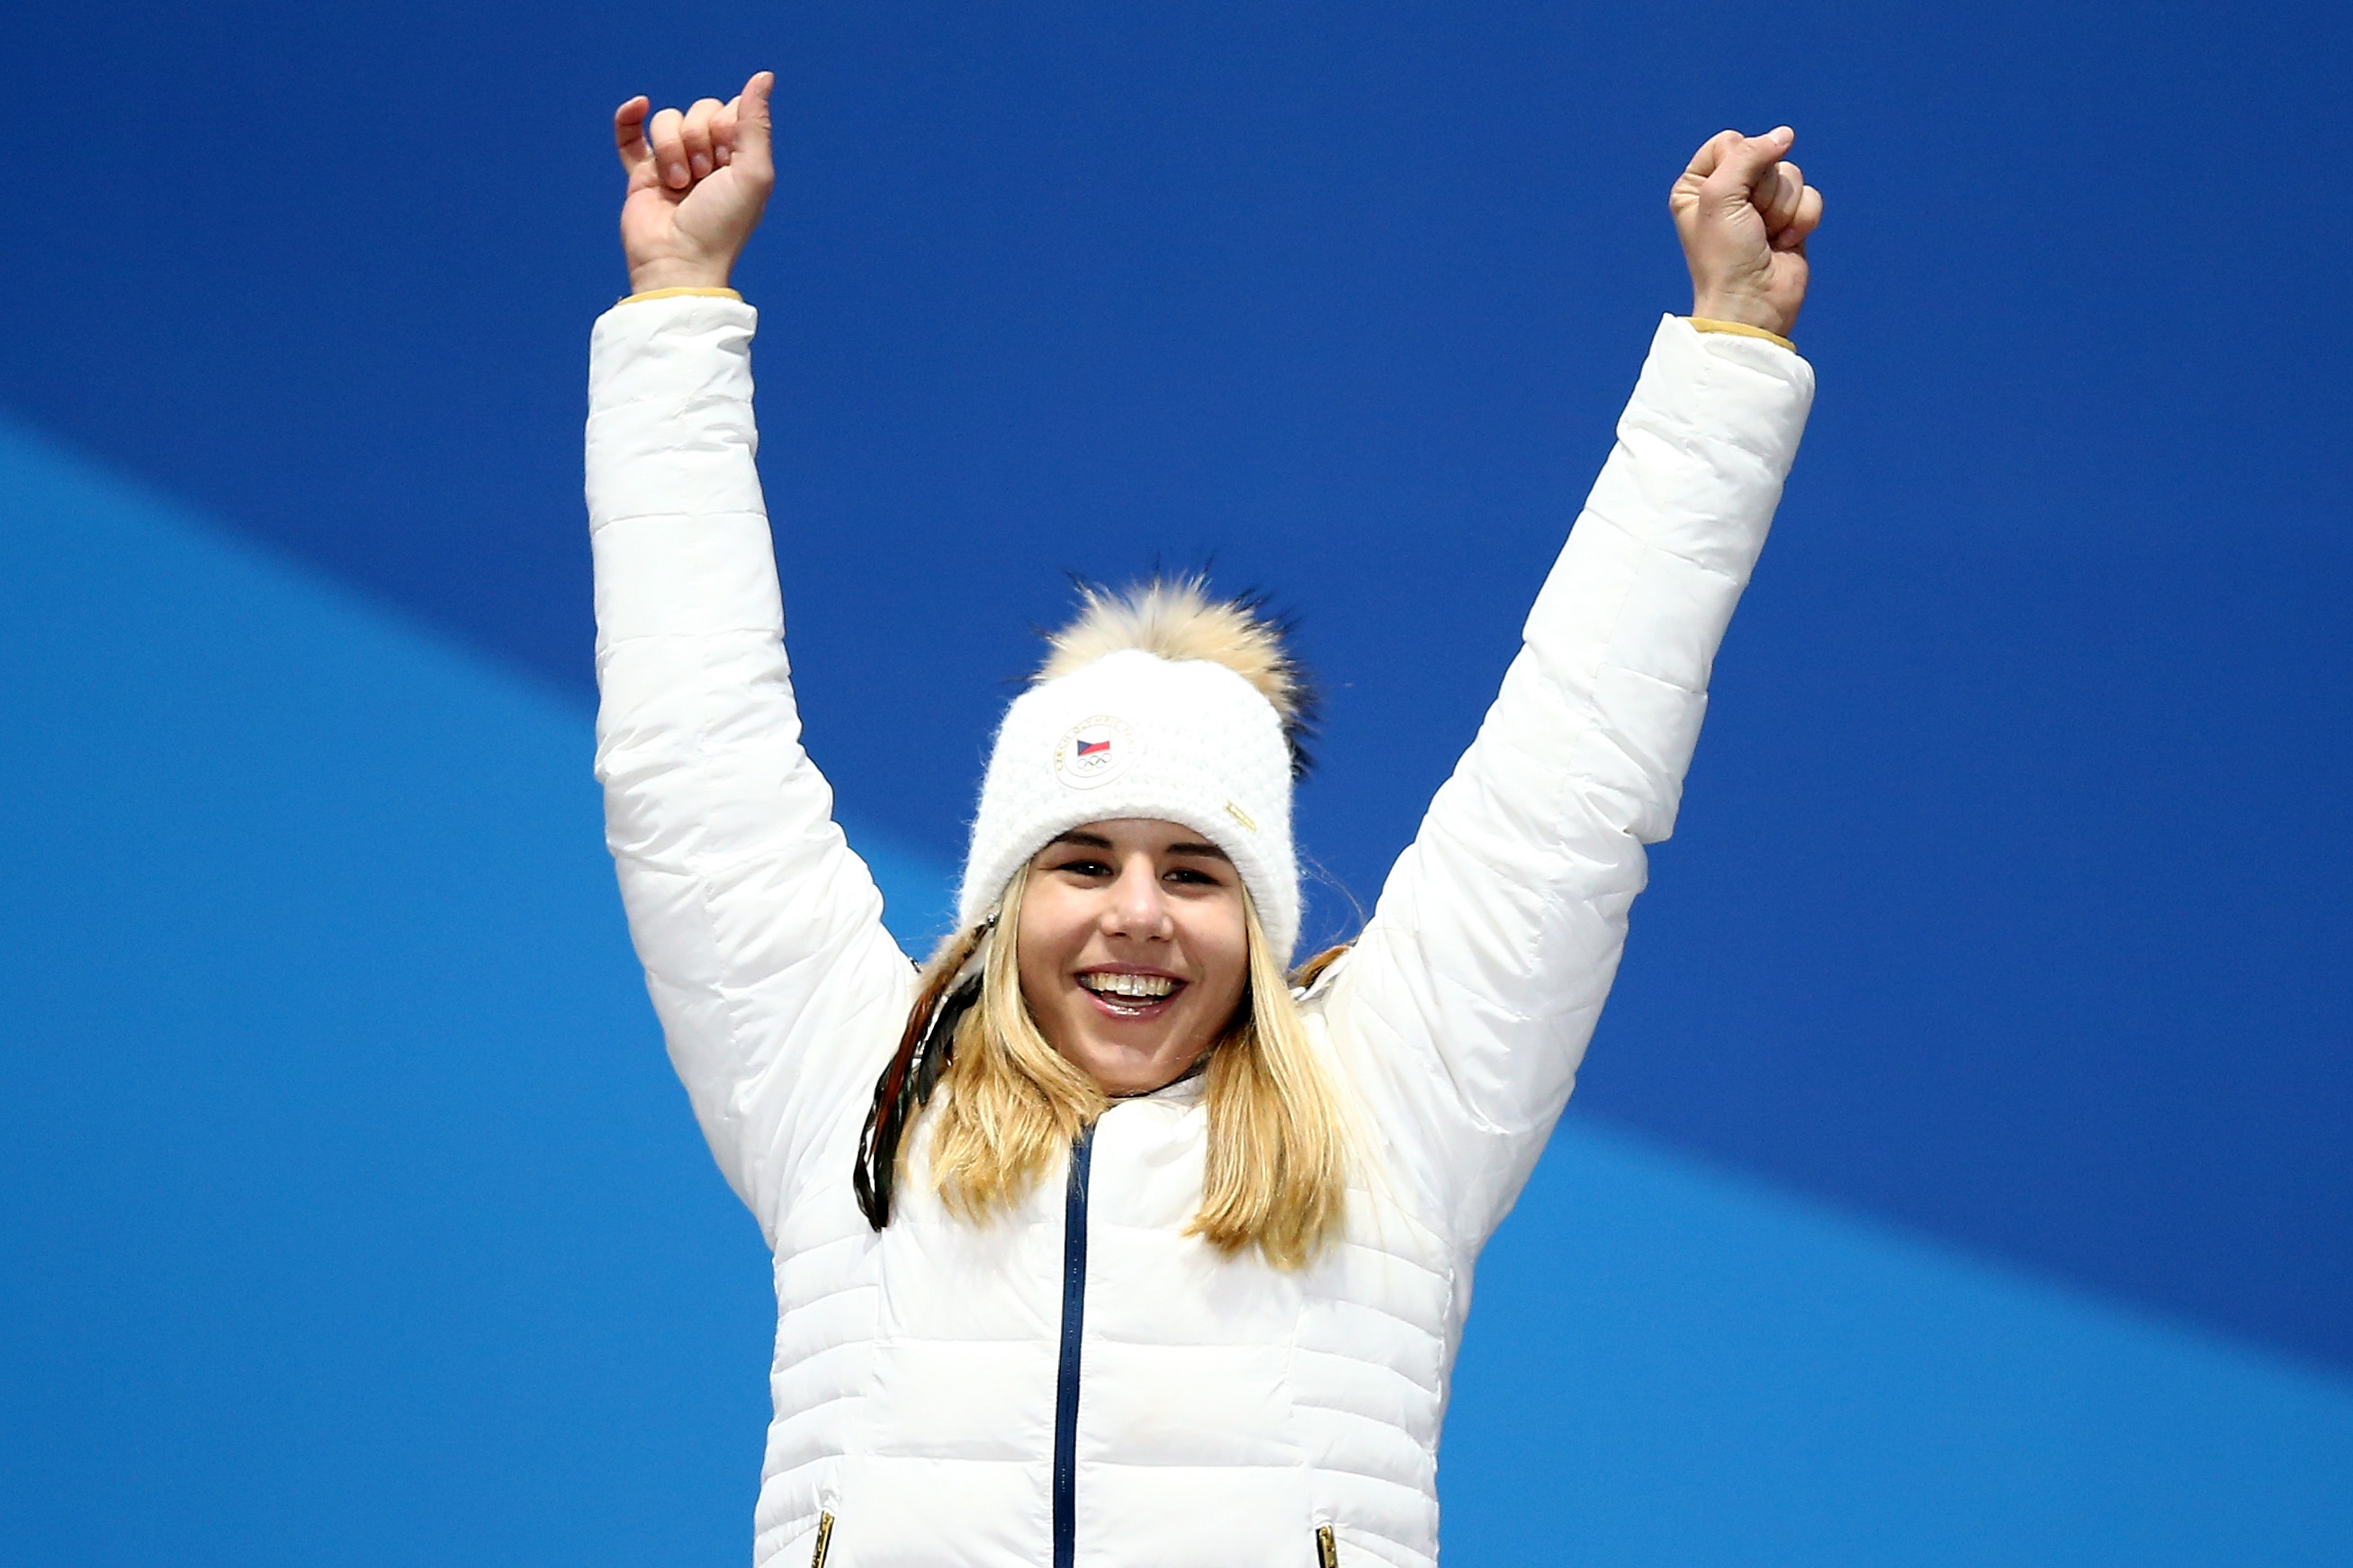 Gold medalist Ester Ledecka of Czech Republic celebrates during the medal ceremony for the Ladies' Alpine Skiing Super-G  on day eight of the PyeongChang 2018 Winter Olympic Games at Medal Plaza on February 17, 2018 in Pyeongchang-gun, South Korea. (Dan Istitene&mdash;Getty Images)